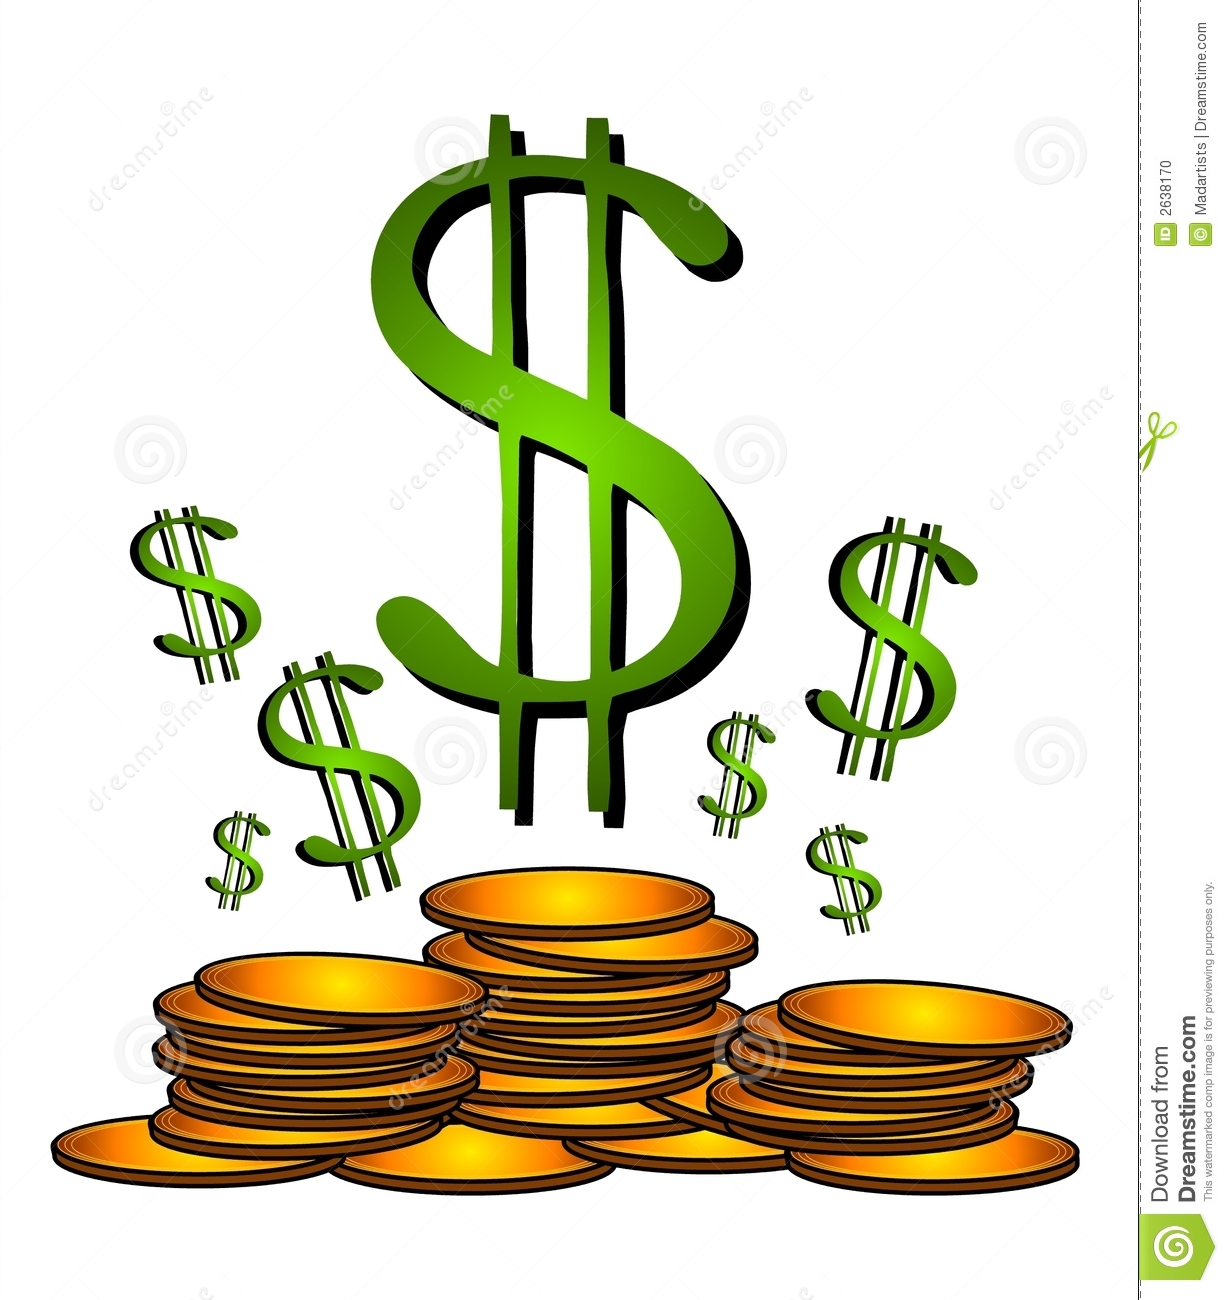 Green Dollar Sign Clipart   Clipart Panda   Free Clipart Images